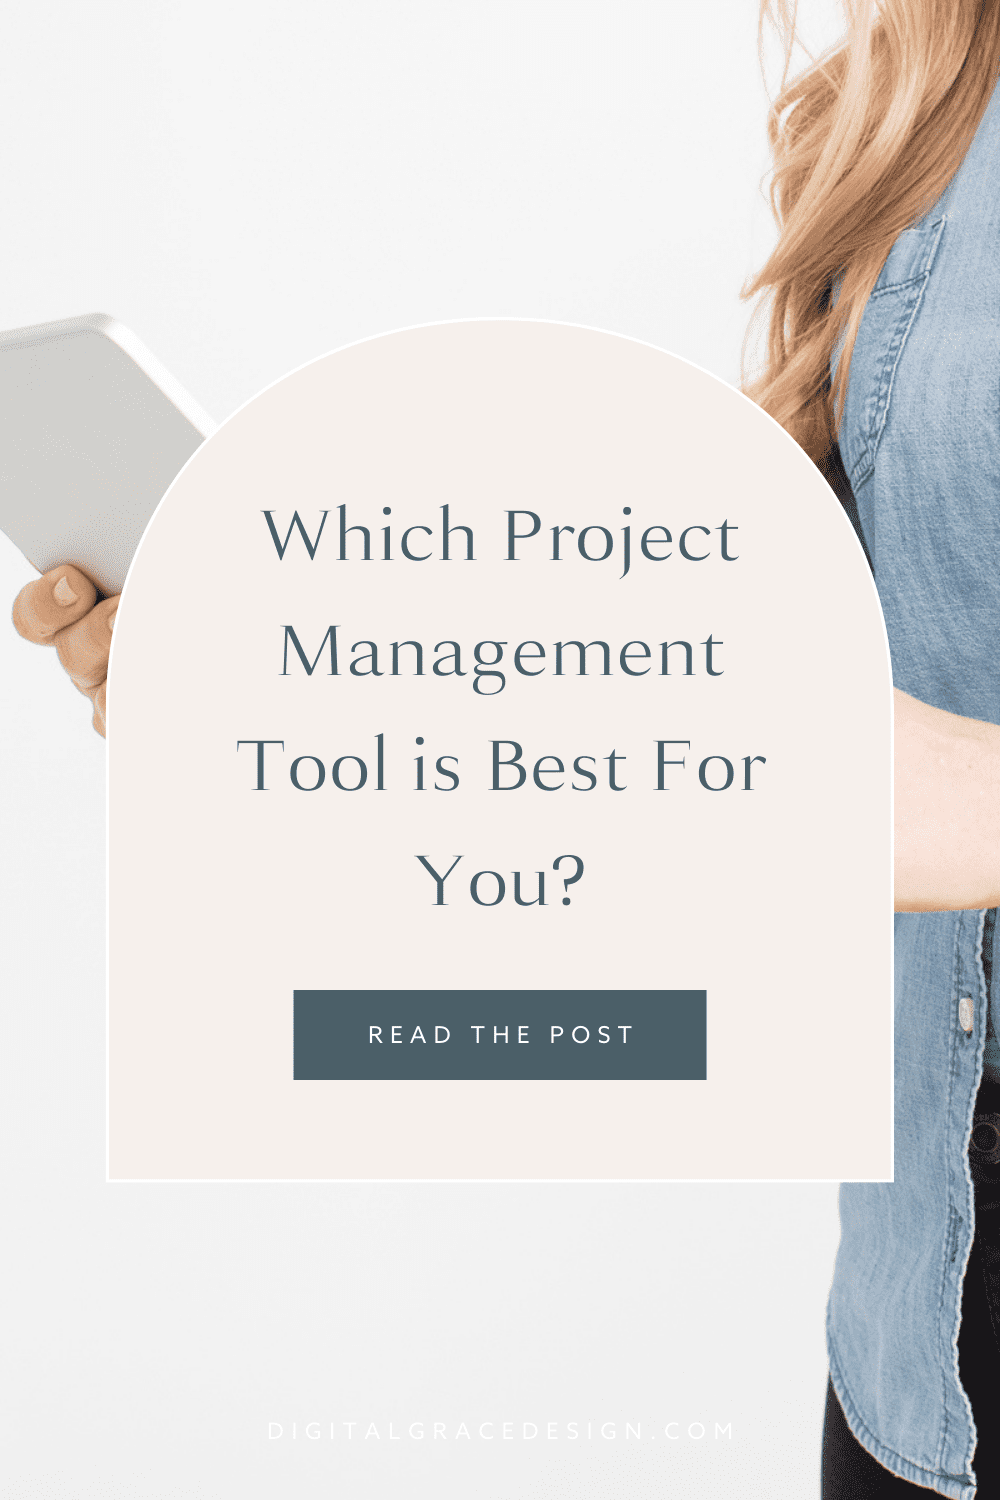 Which Project Management Tool is Best For You?